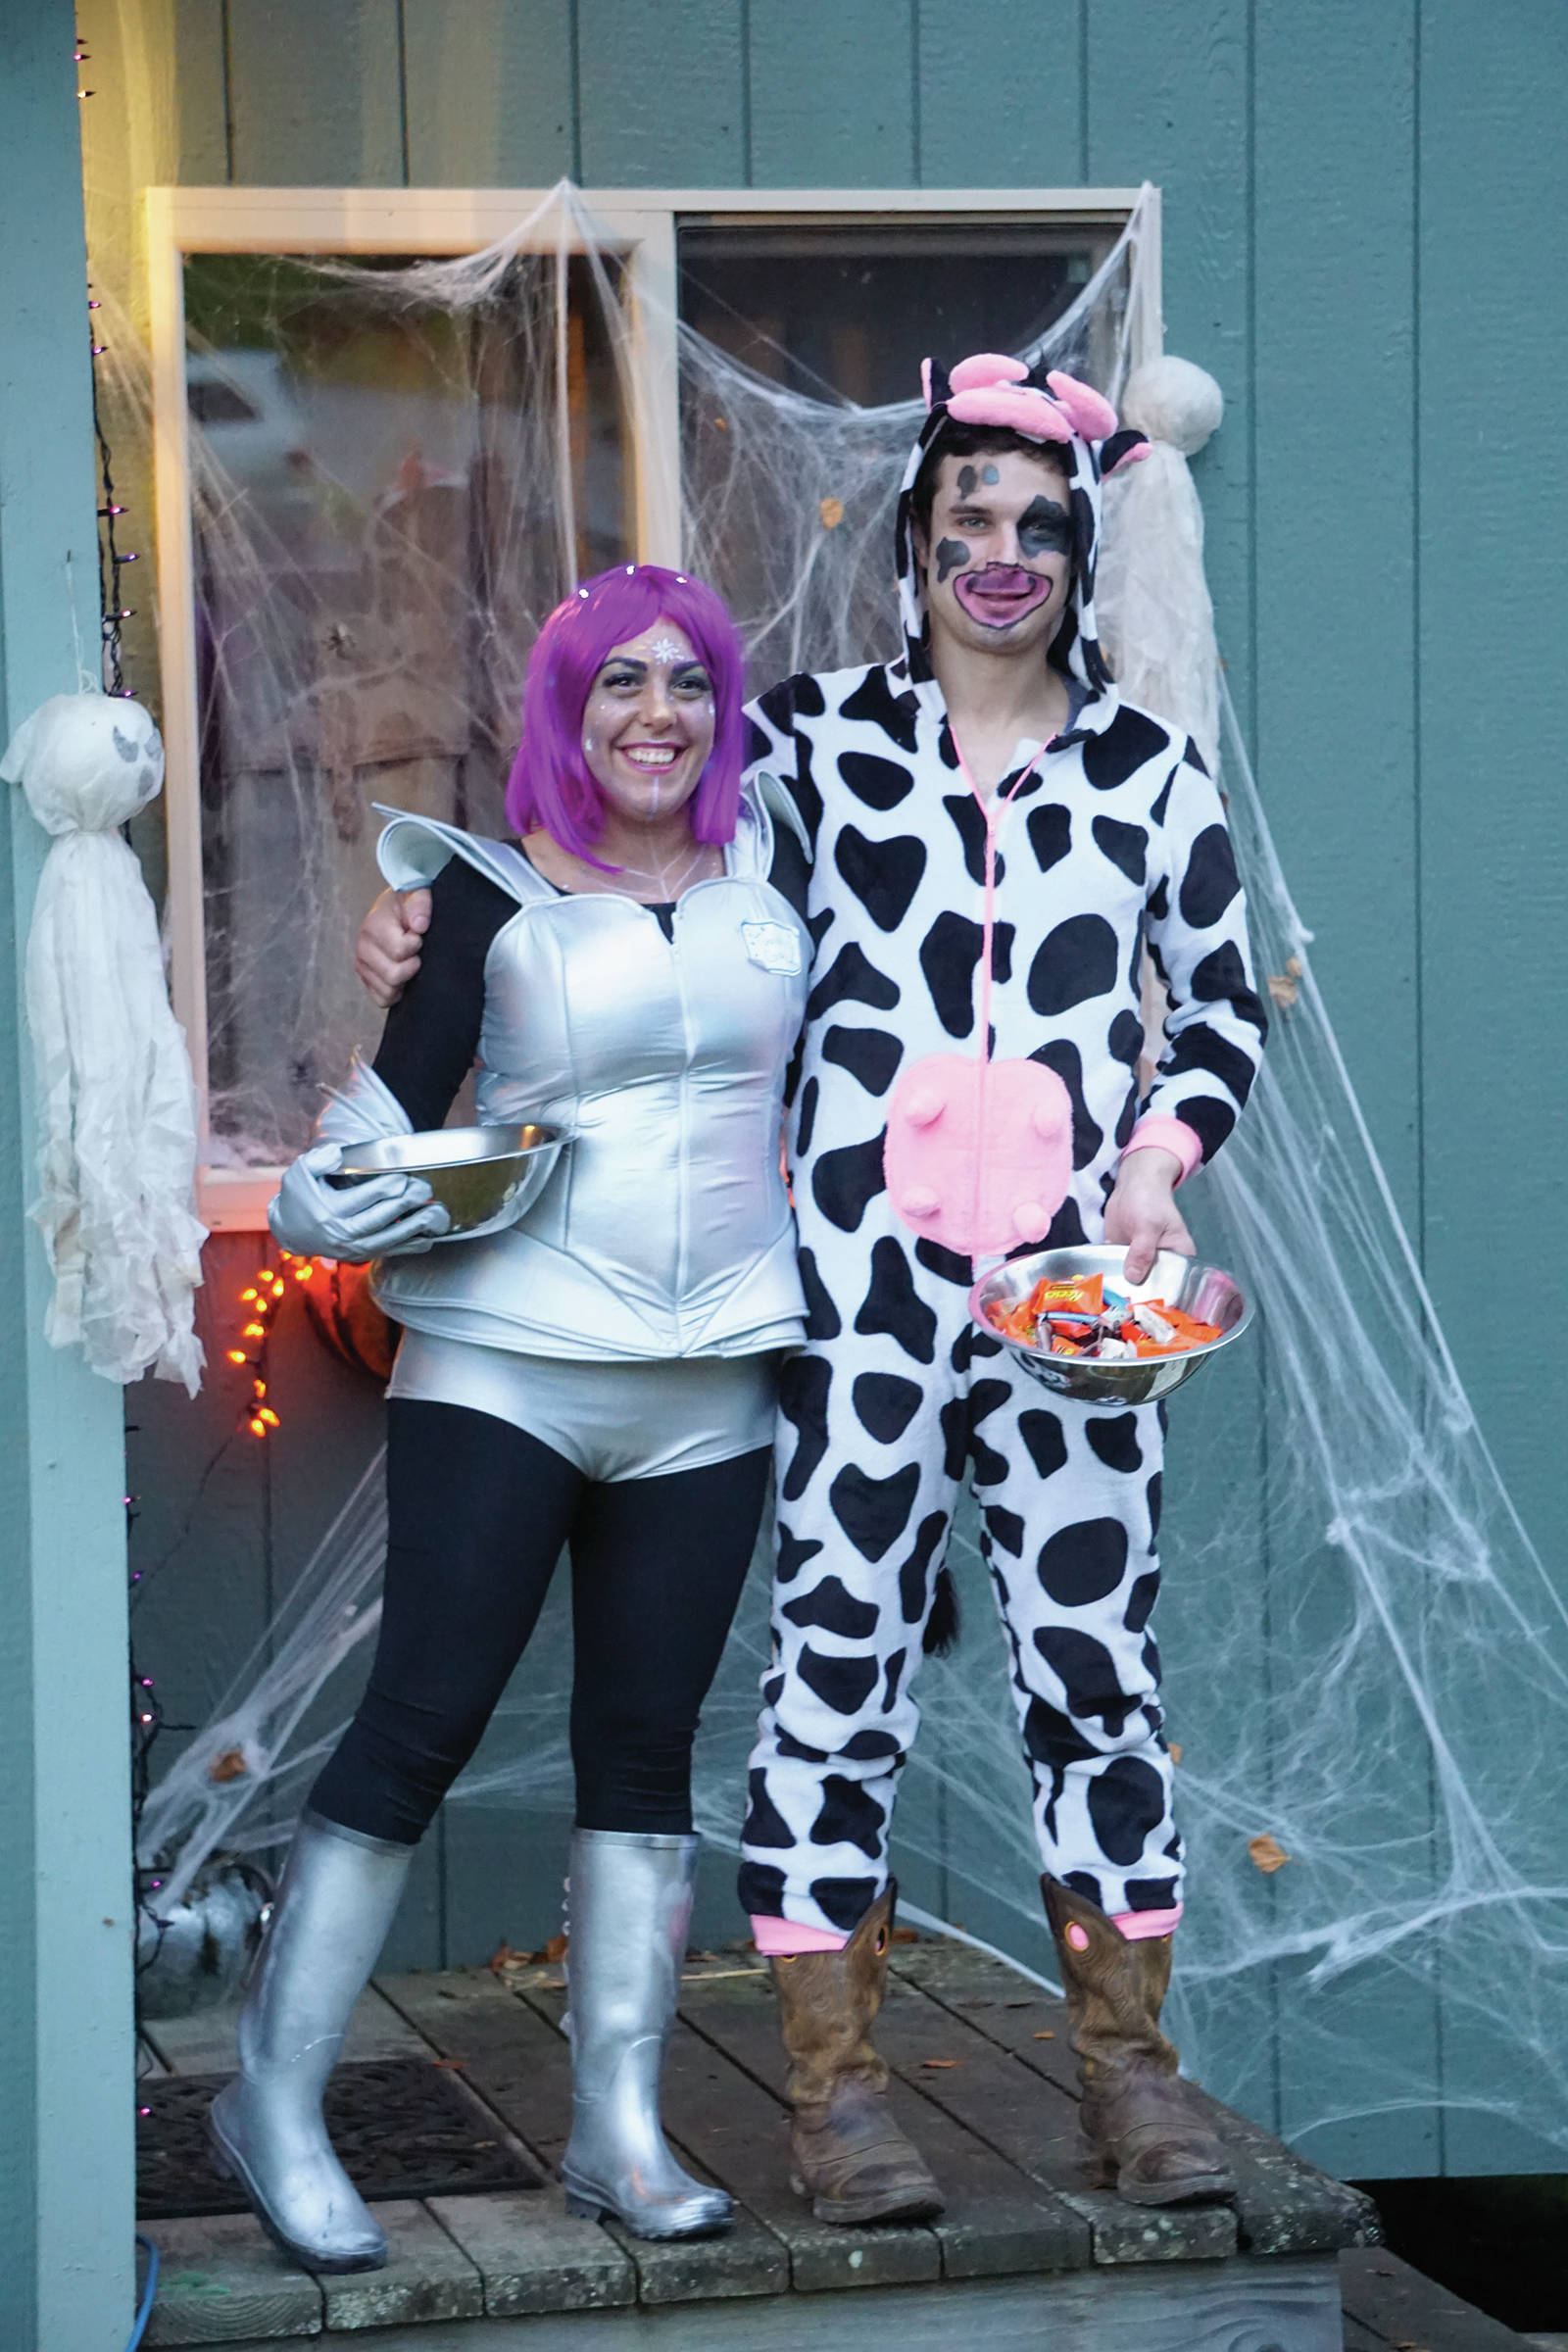 Mandy Jahanbin, left, and Nick Dufour, right, hand on candy for Halloween on Oct. 31, 2019, in Homer, Alaska. (Photo by Michael Armstrong/Homer News)